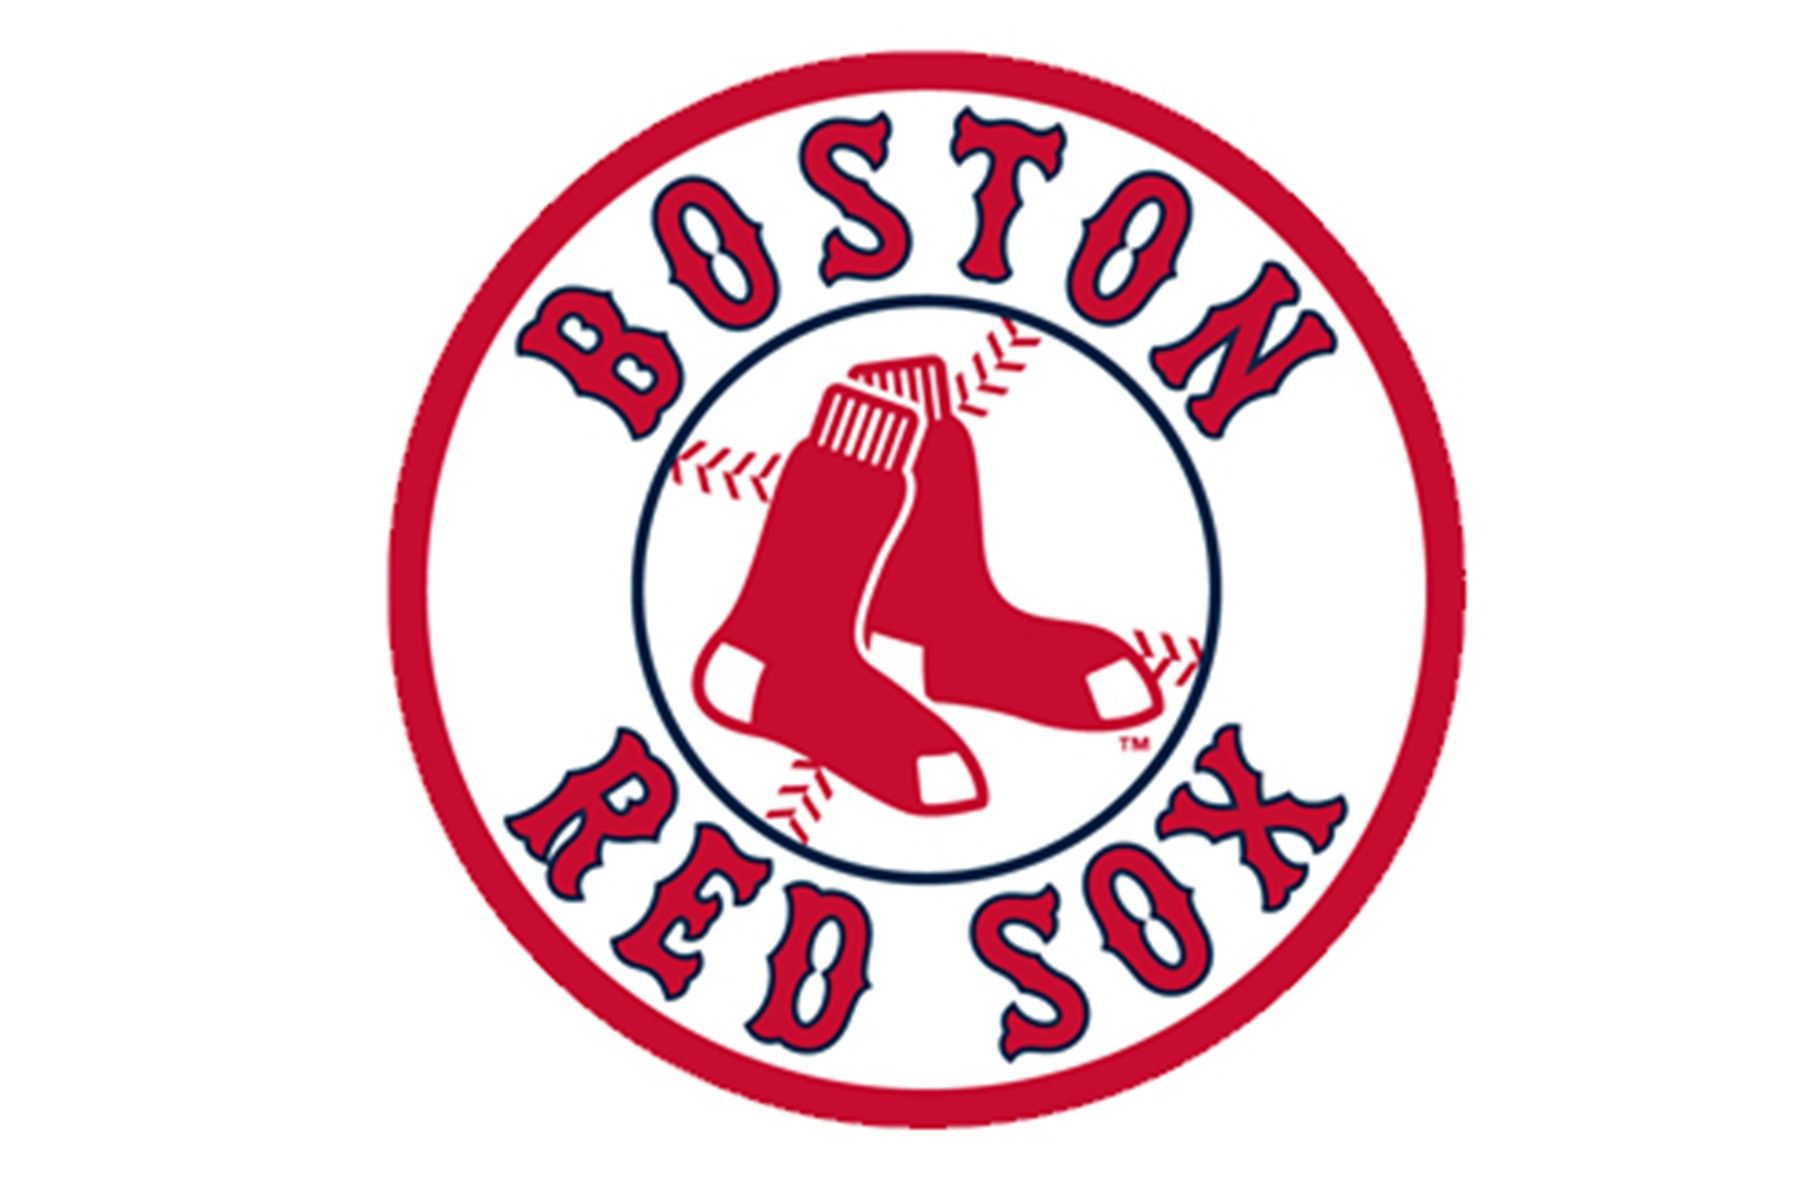 Boston Red Sox Logo Wallpapers - Wallpaper Cave